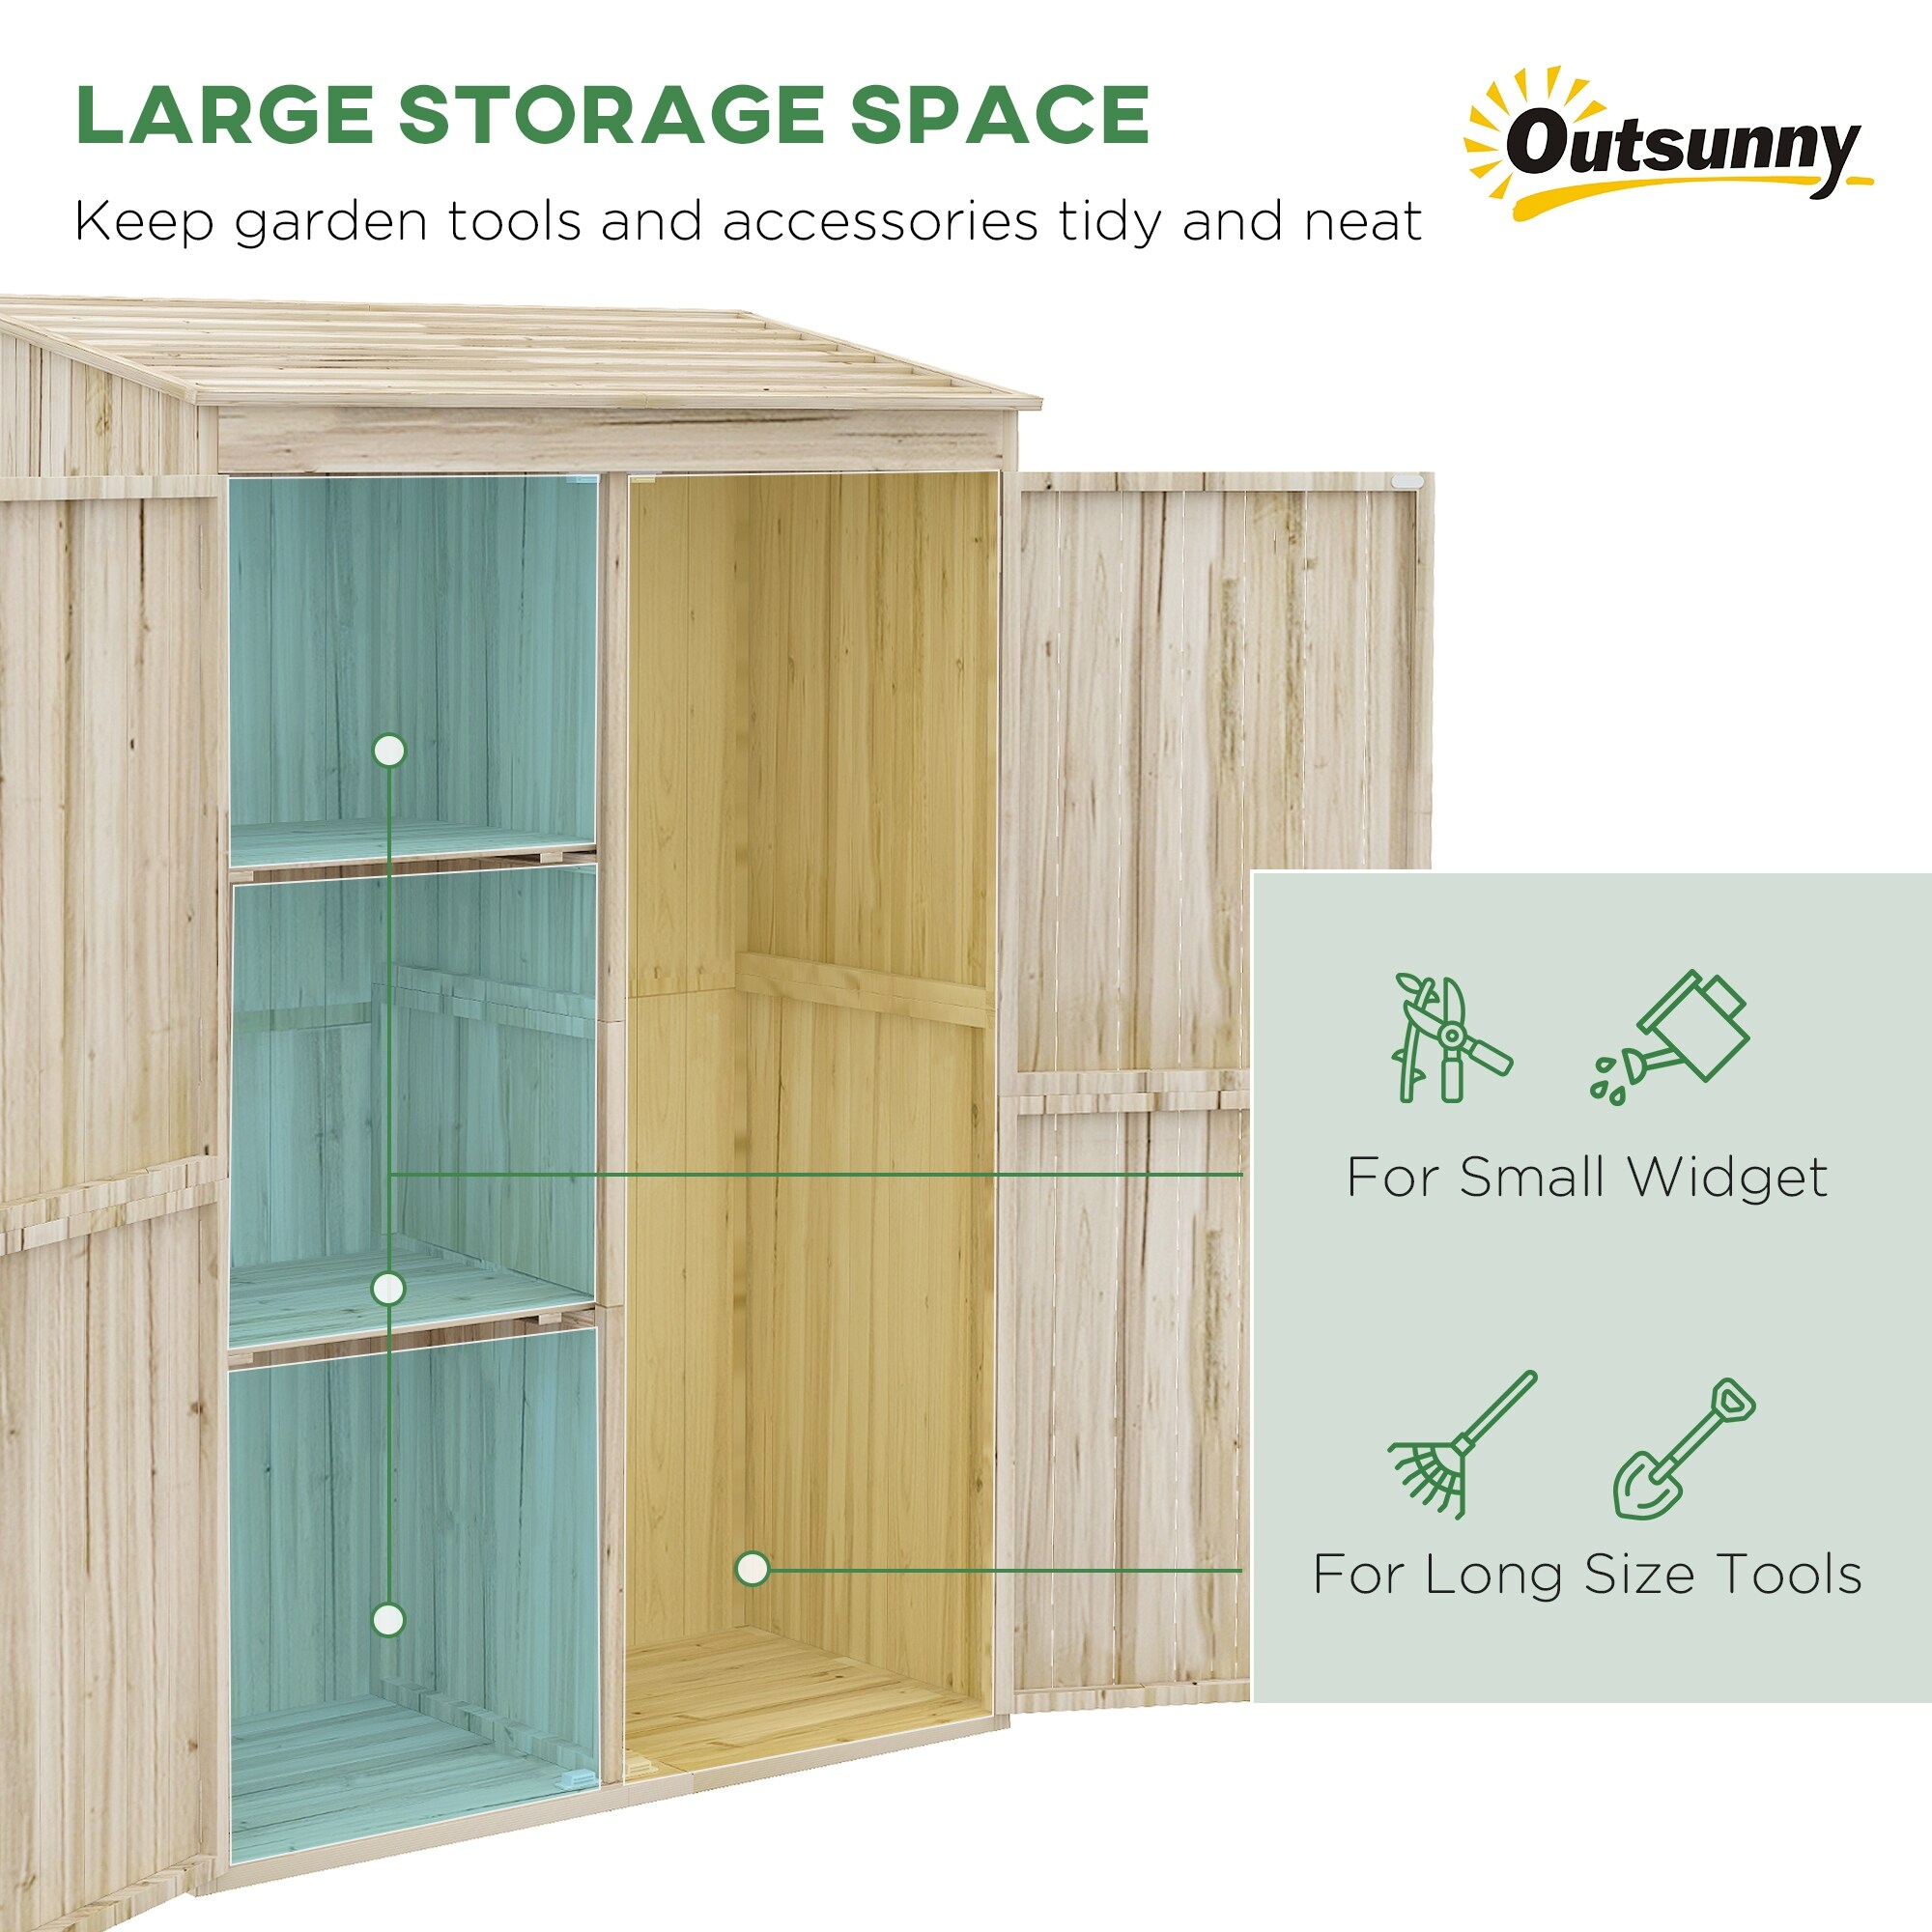 https://ak1.ostkcdn.com/images/products/is/images/direct/44acef5bcc7694d957b62fb82e1572c4a12bd578/Outsunny-Outdoor-Storage-Cabinet-with-3-Shelves%2C-Wooden-Garden-Shed-with-Magnetic-Double-Doors%2C-Tall-Vertical-Tool-Storage.jpg